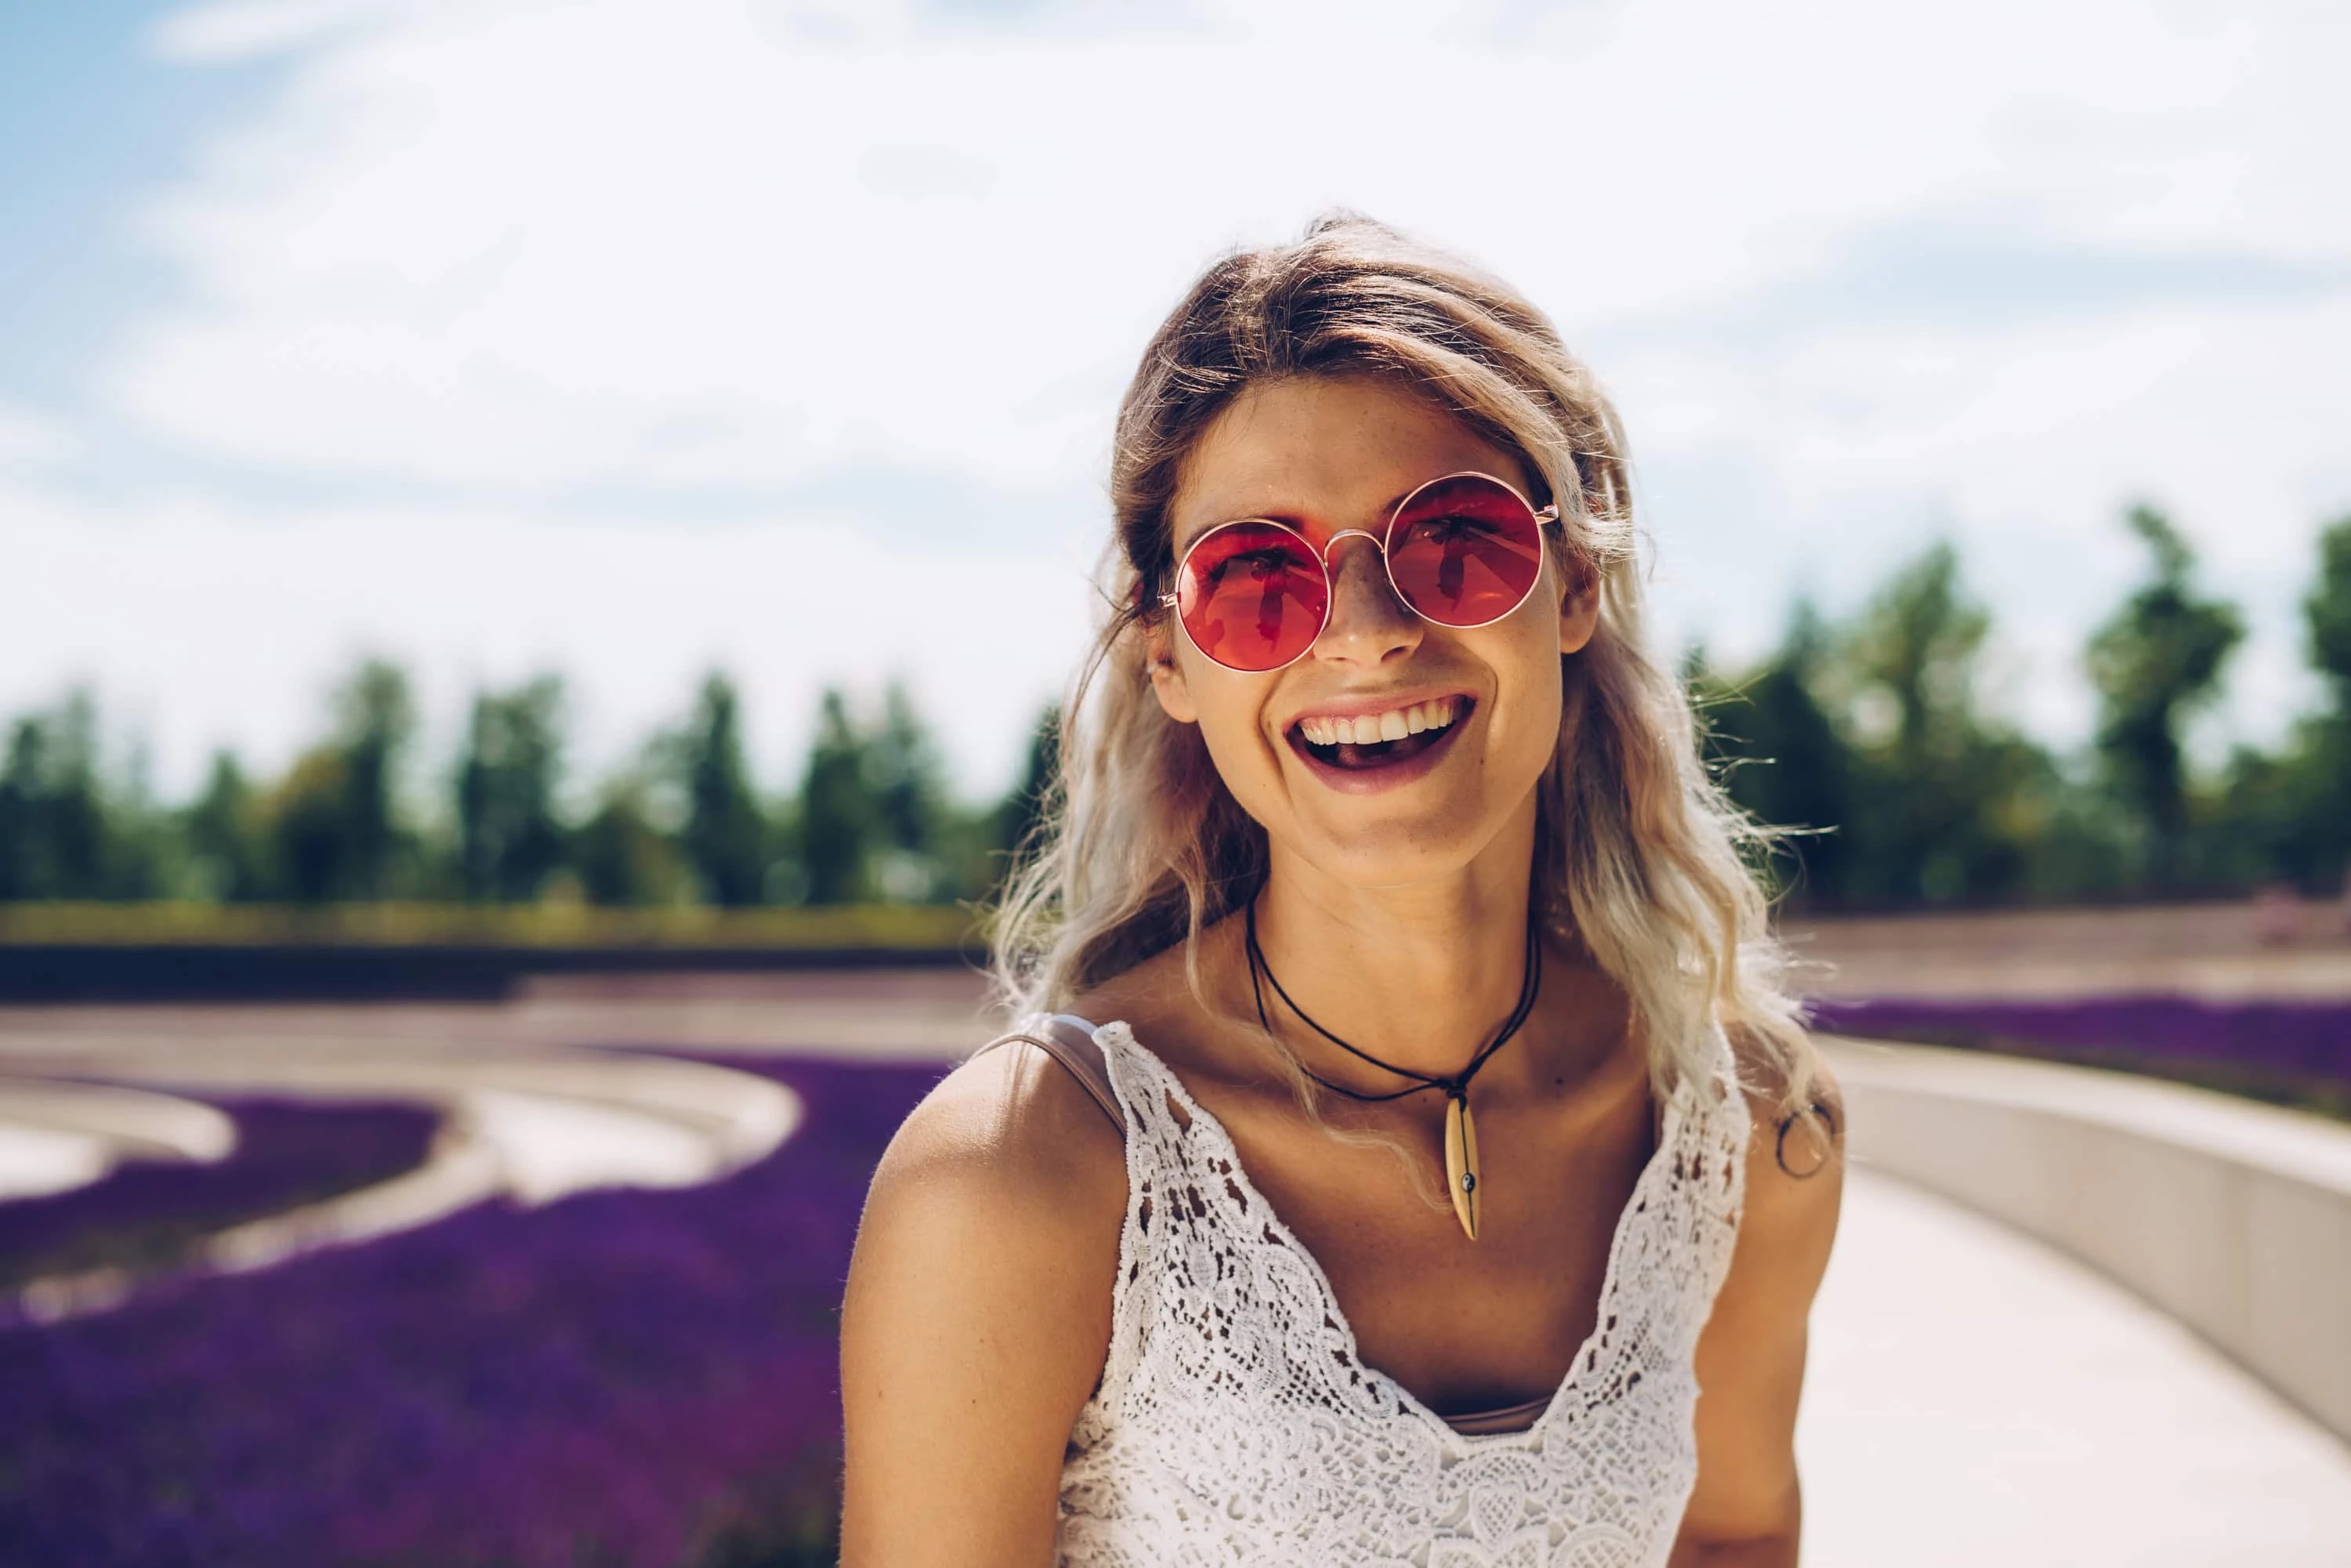 Smiling lady in a lavender field with sunglasses on